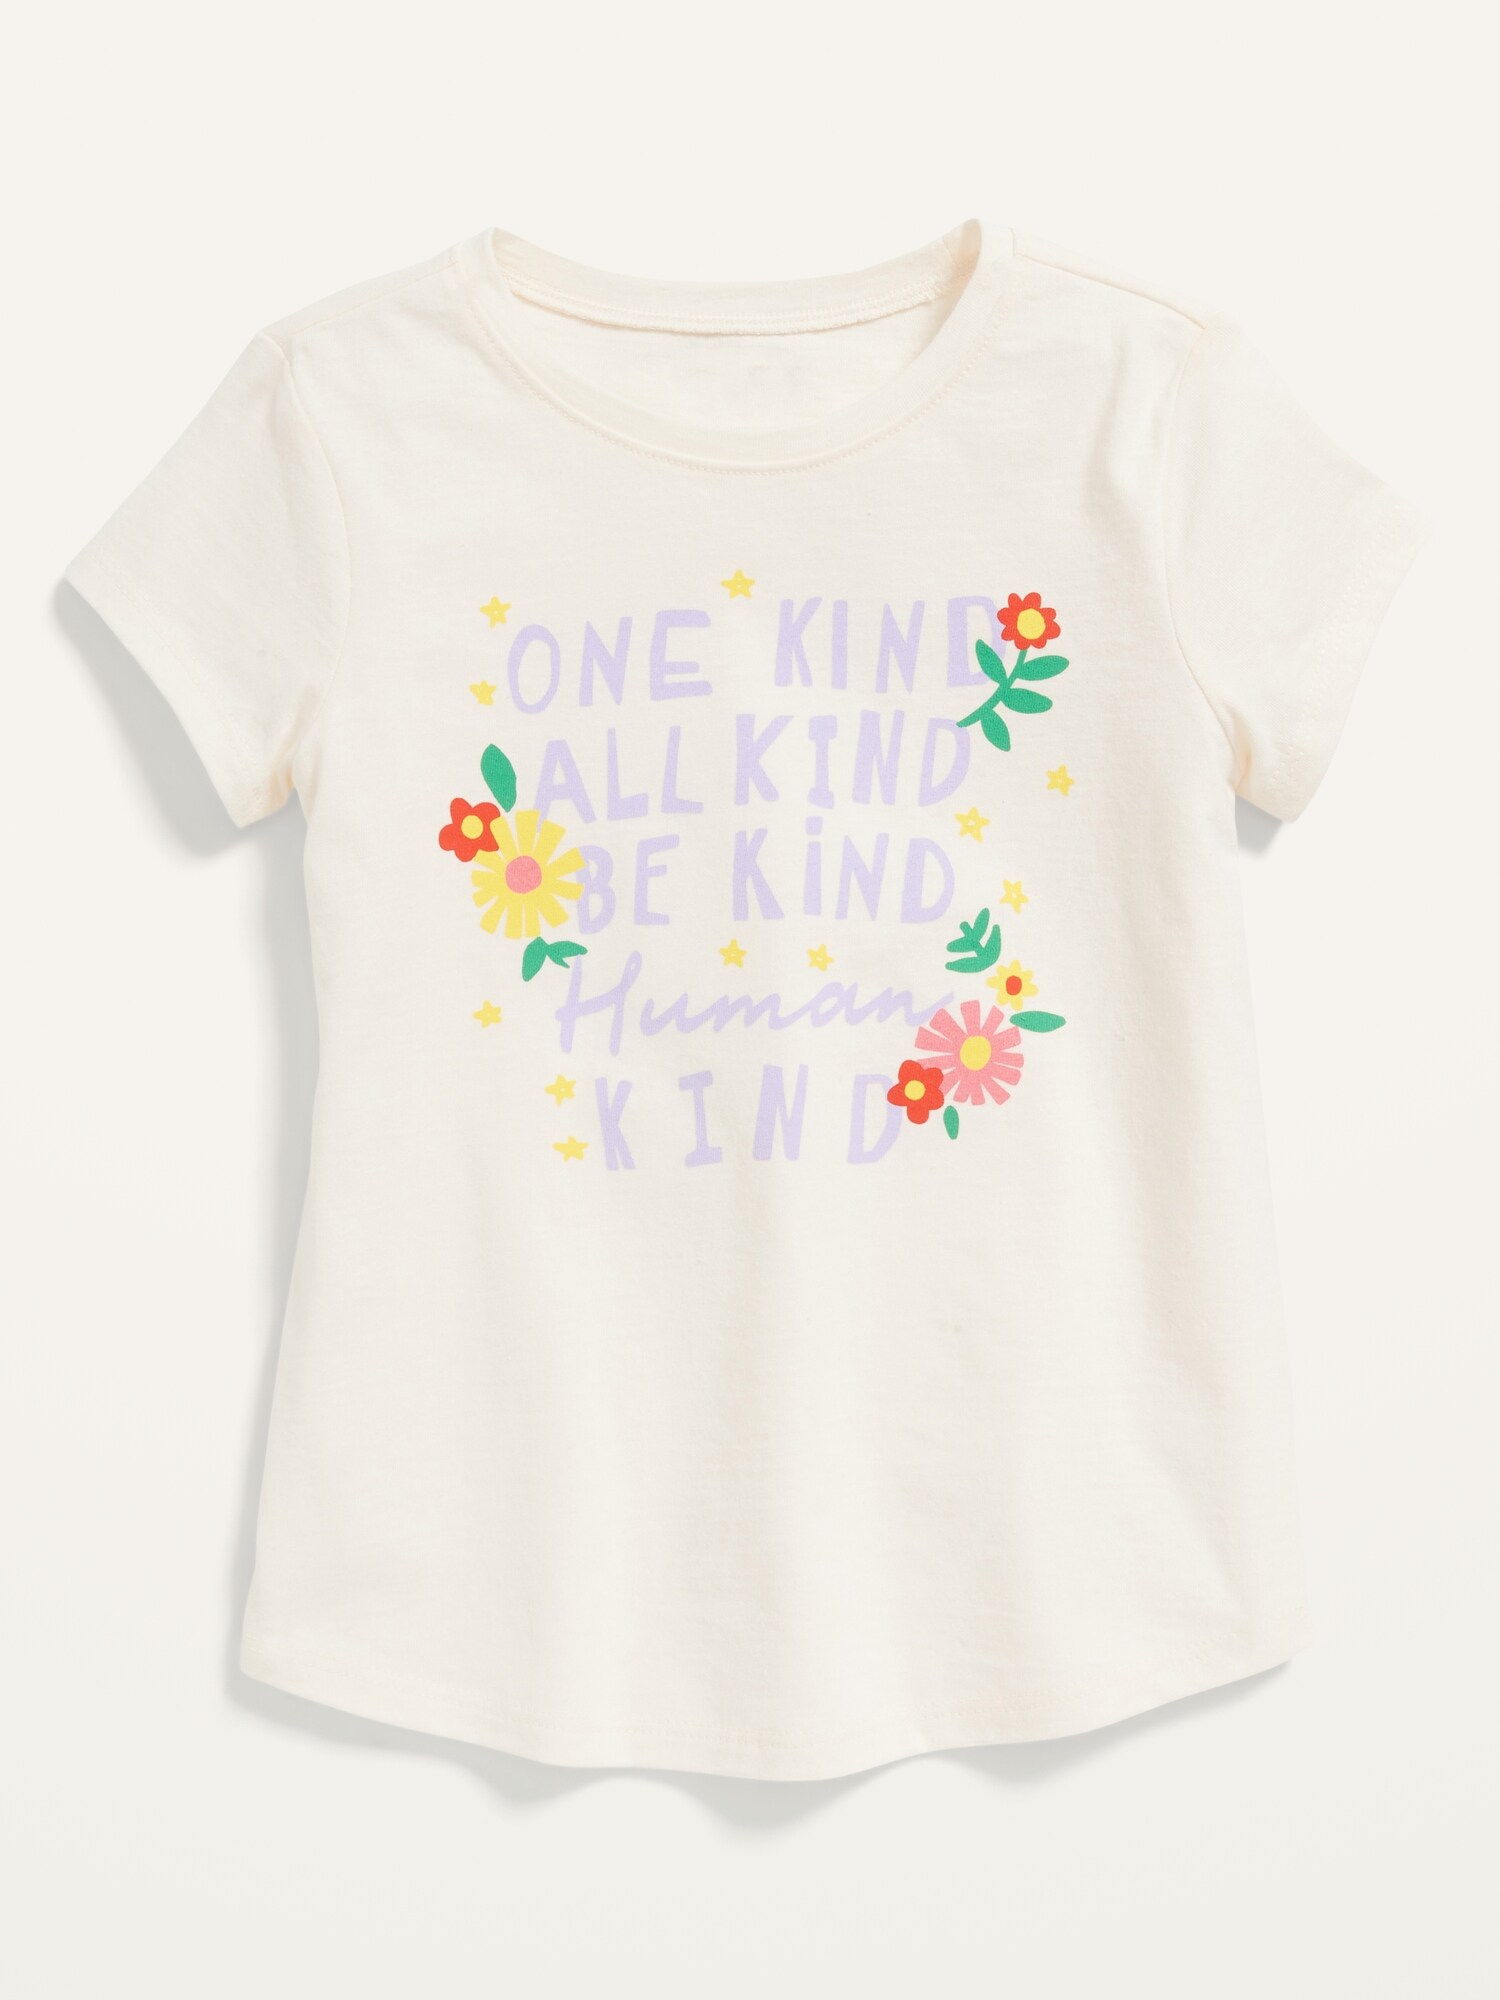 Unisex Graphic Scoop-Neck T-Shirt for Toddler | Old Navy